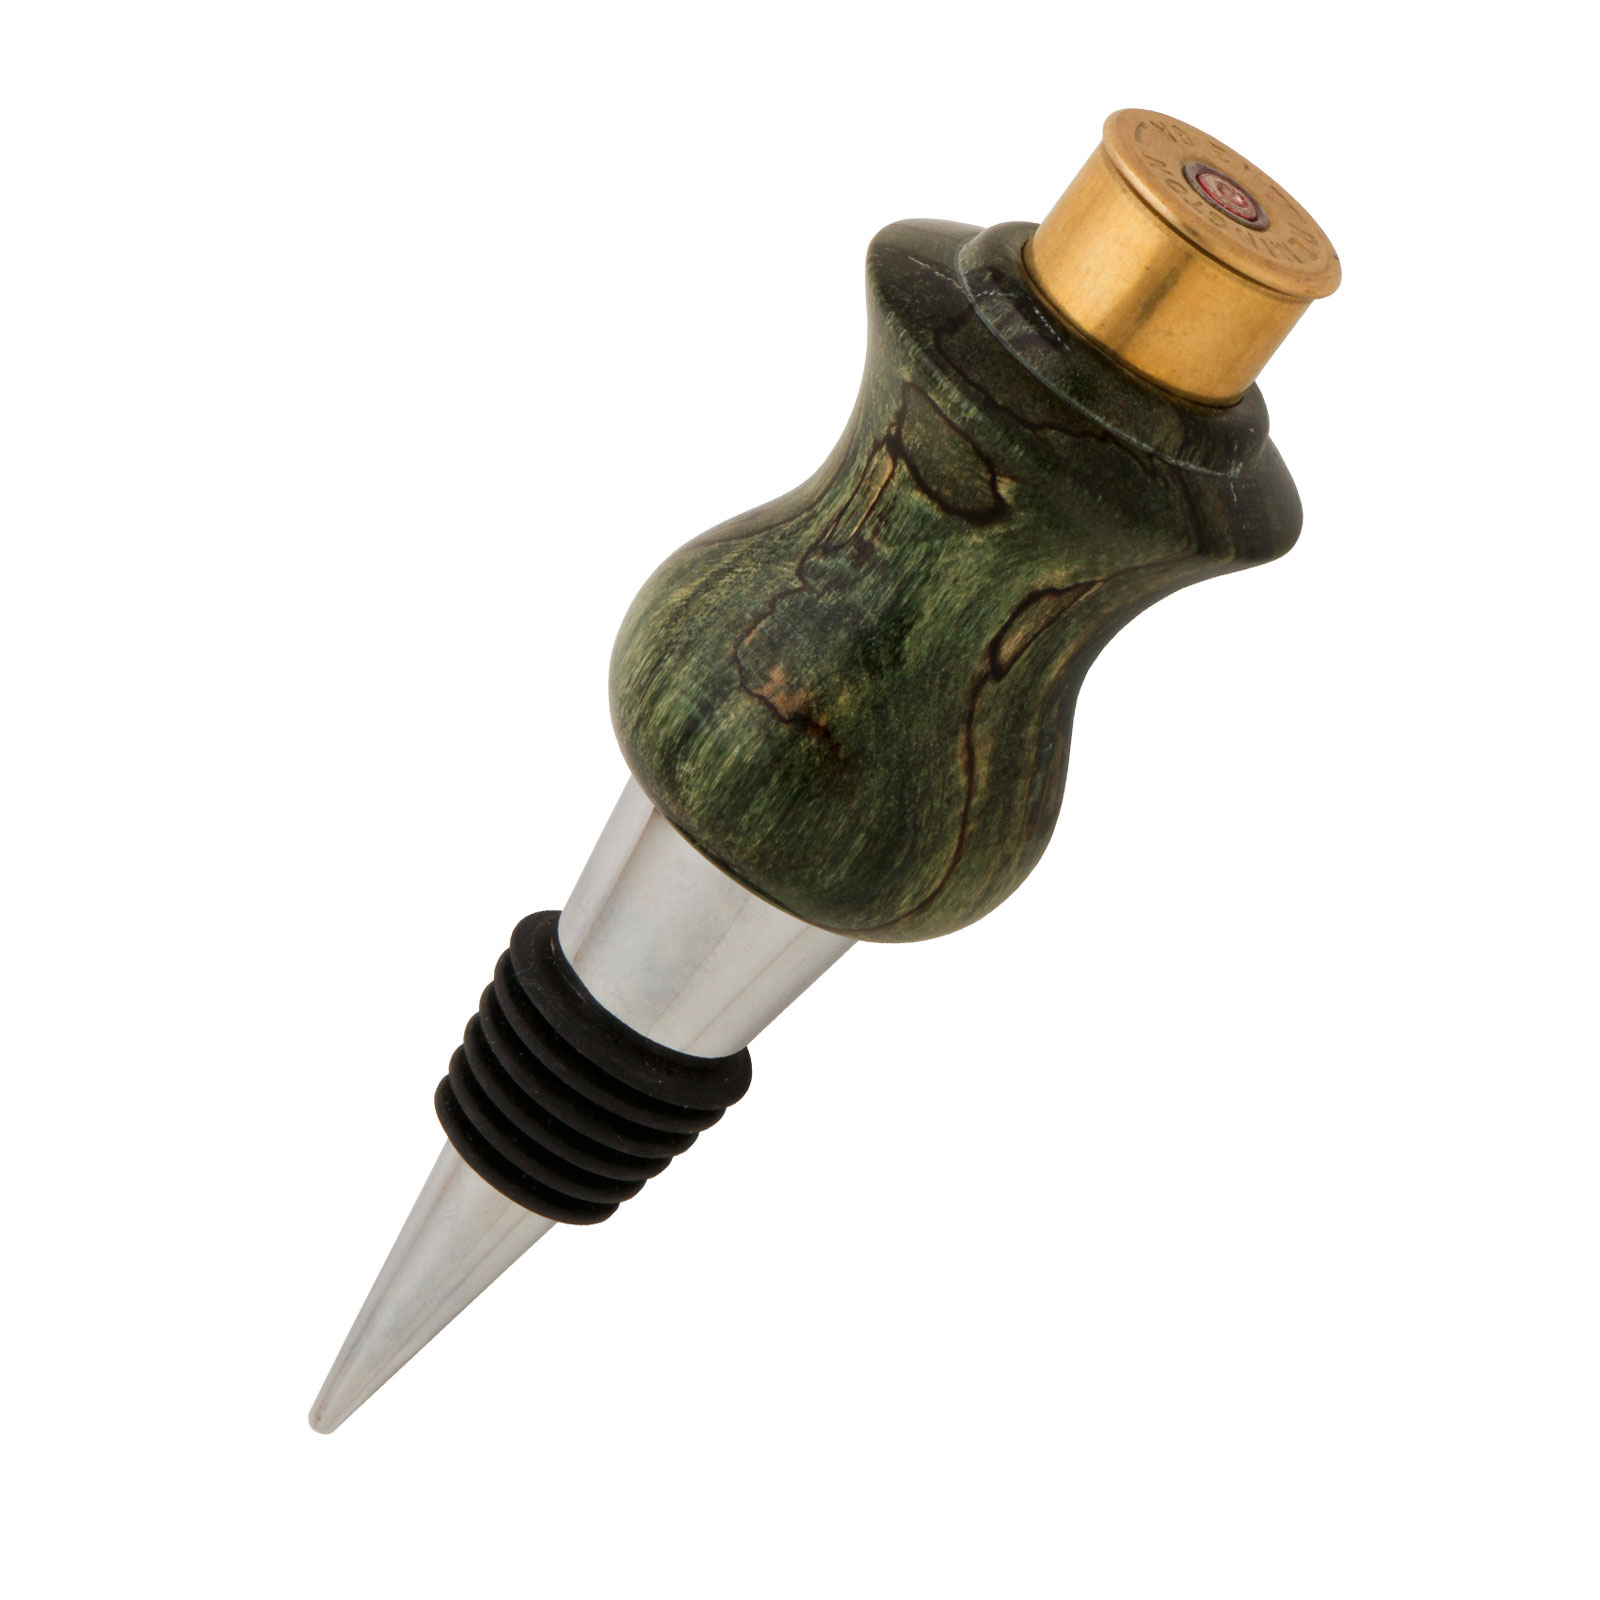 Woodturning Bottle Stopper Kit Using A Wood Router